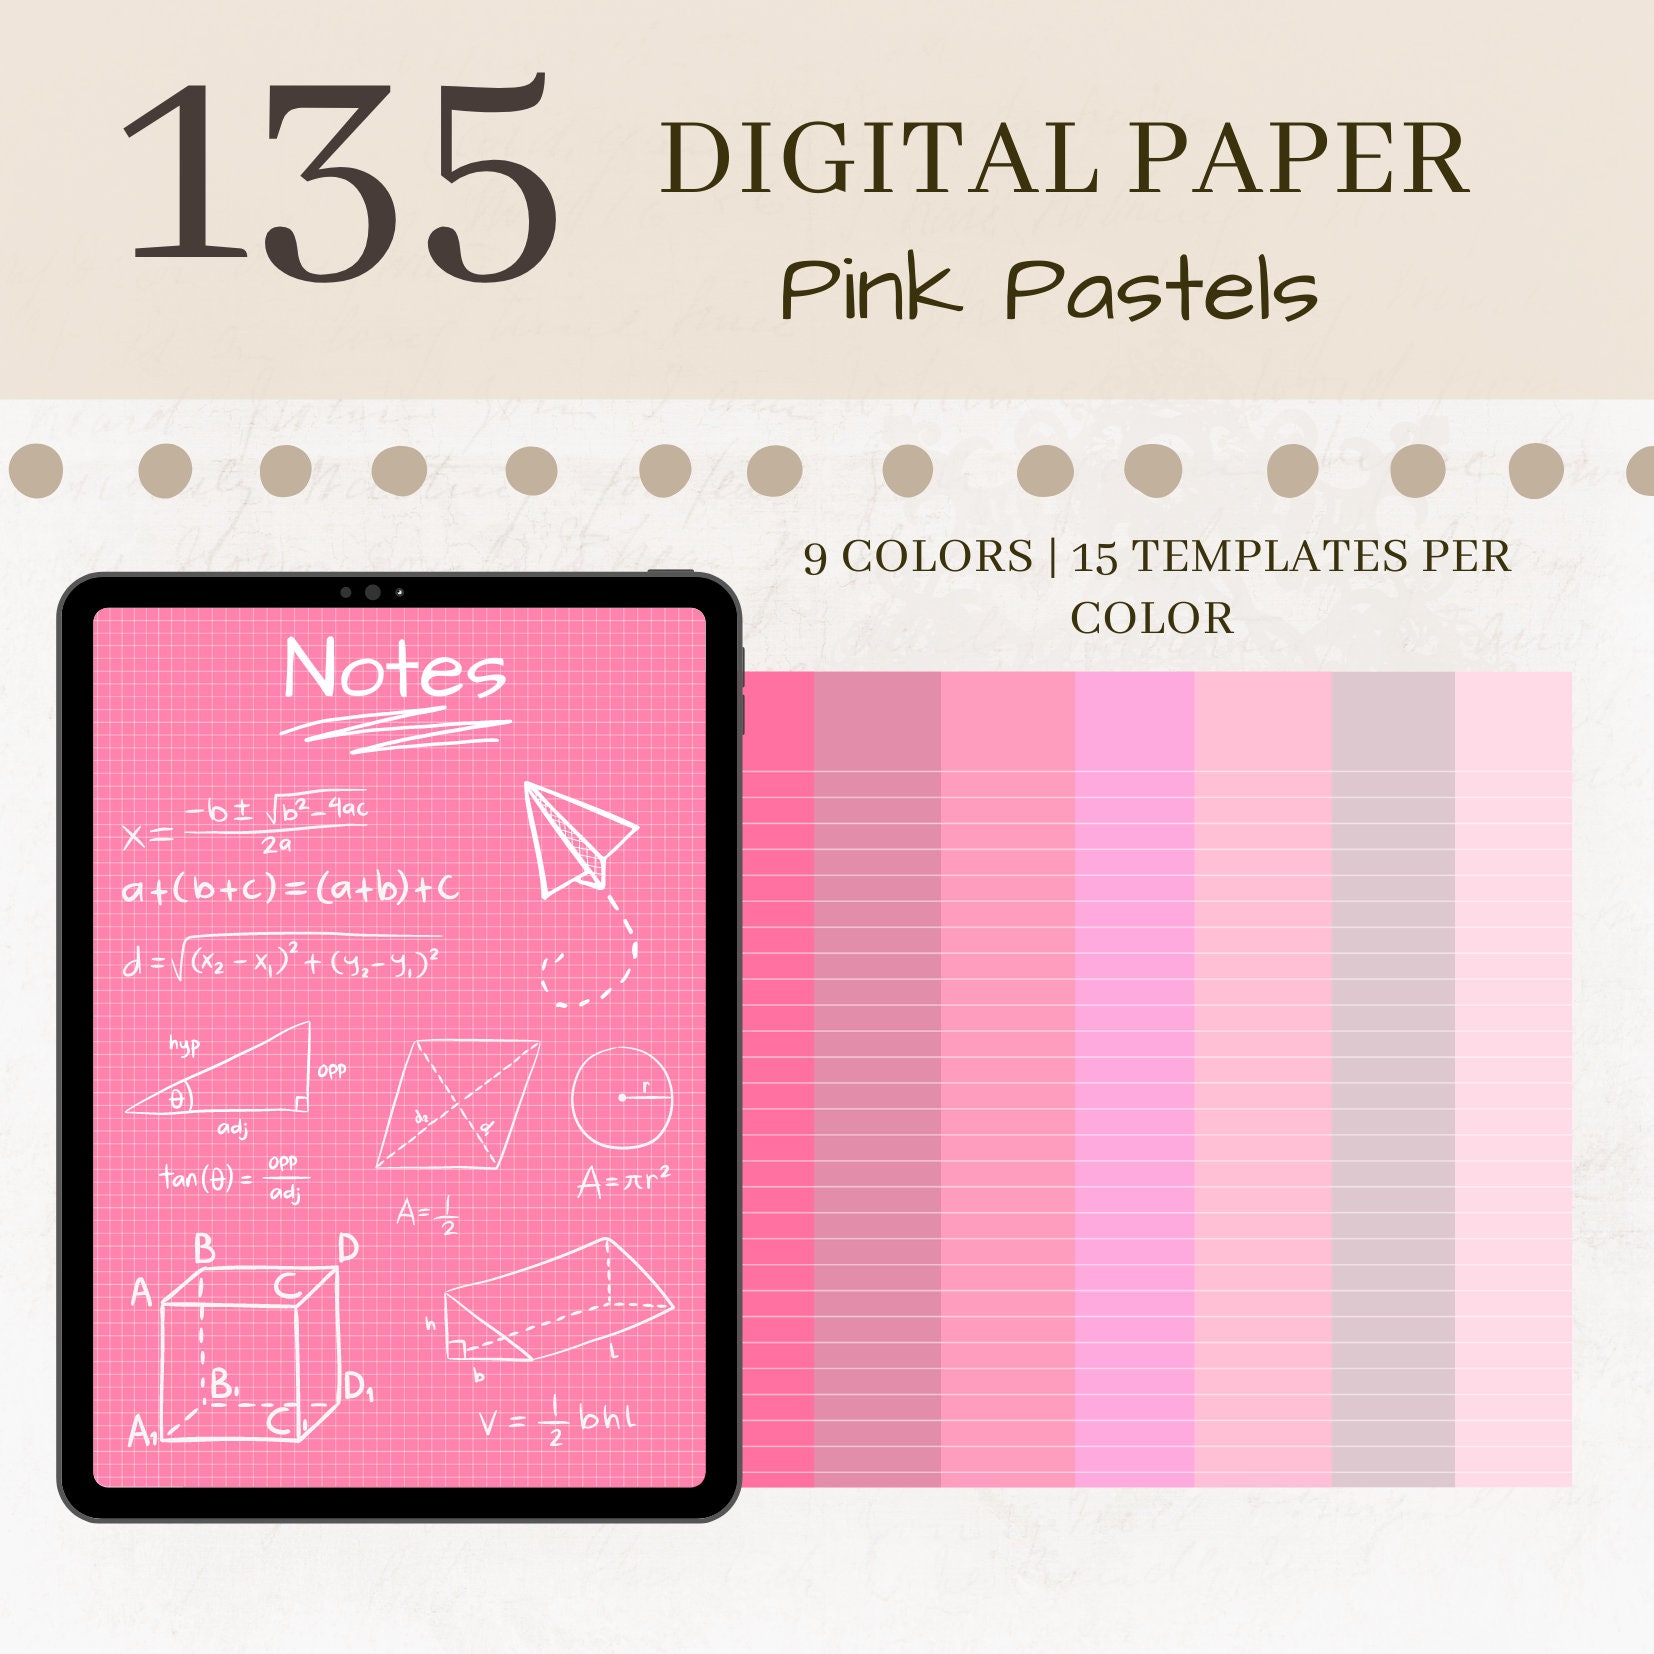 B6 Blank Notebook pink Snow / Pink Drawing Notebook / Pink Colored